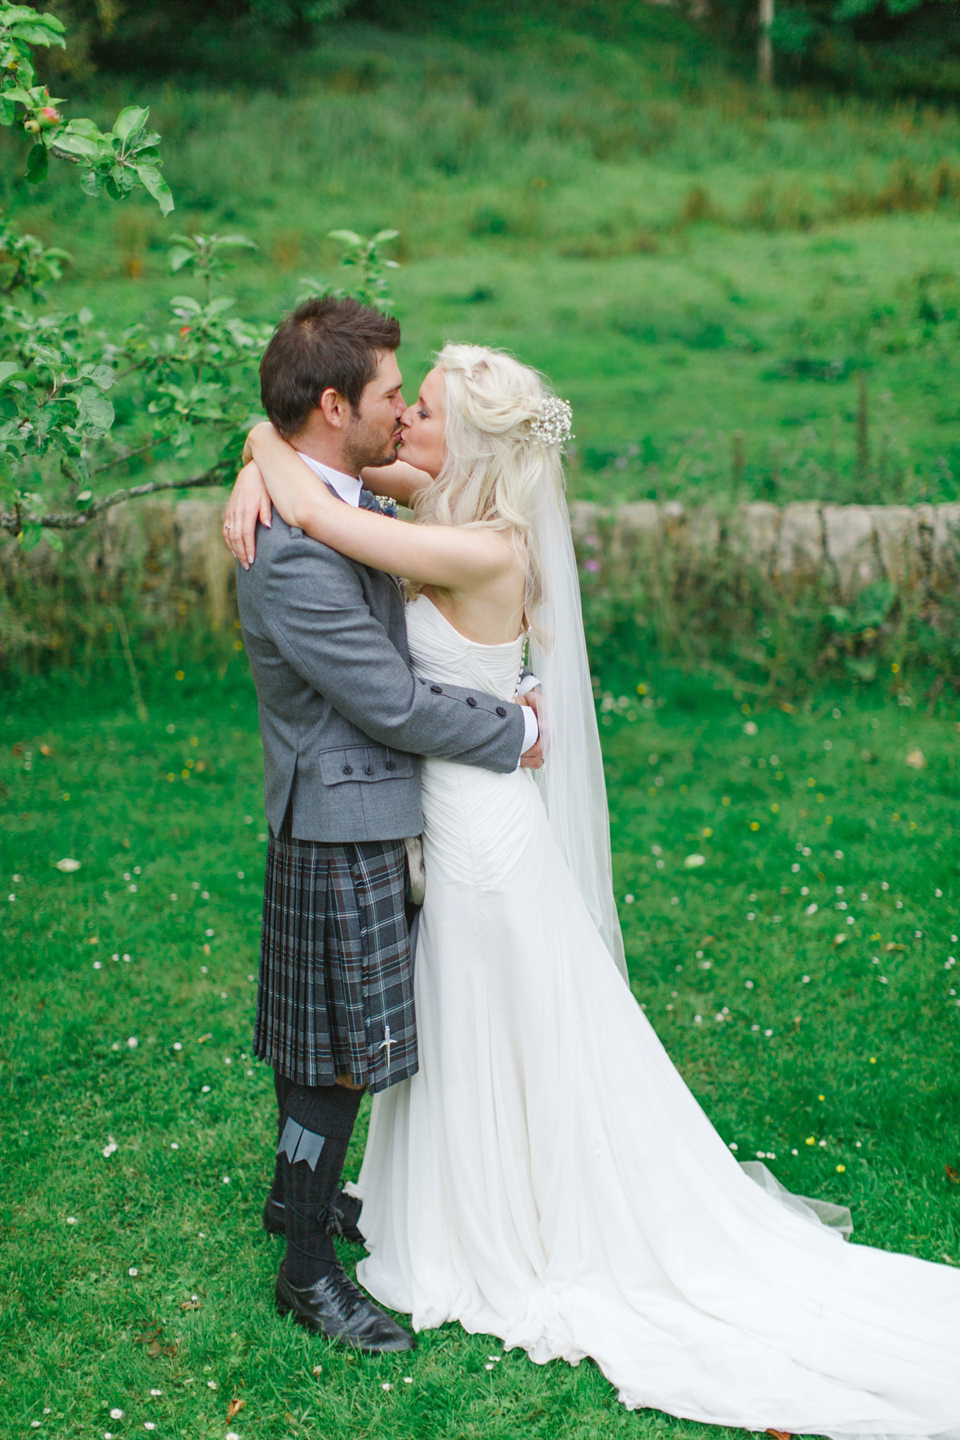 Mhairi wore an Enzoani gown for her rustic vintage inspired barn wedding in Scotland. Photography by The Gibsons.